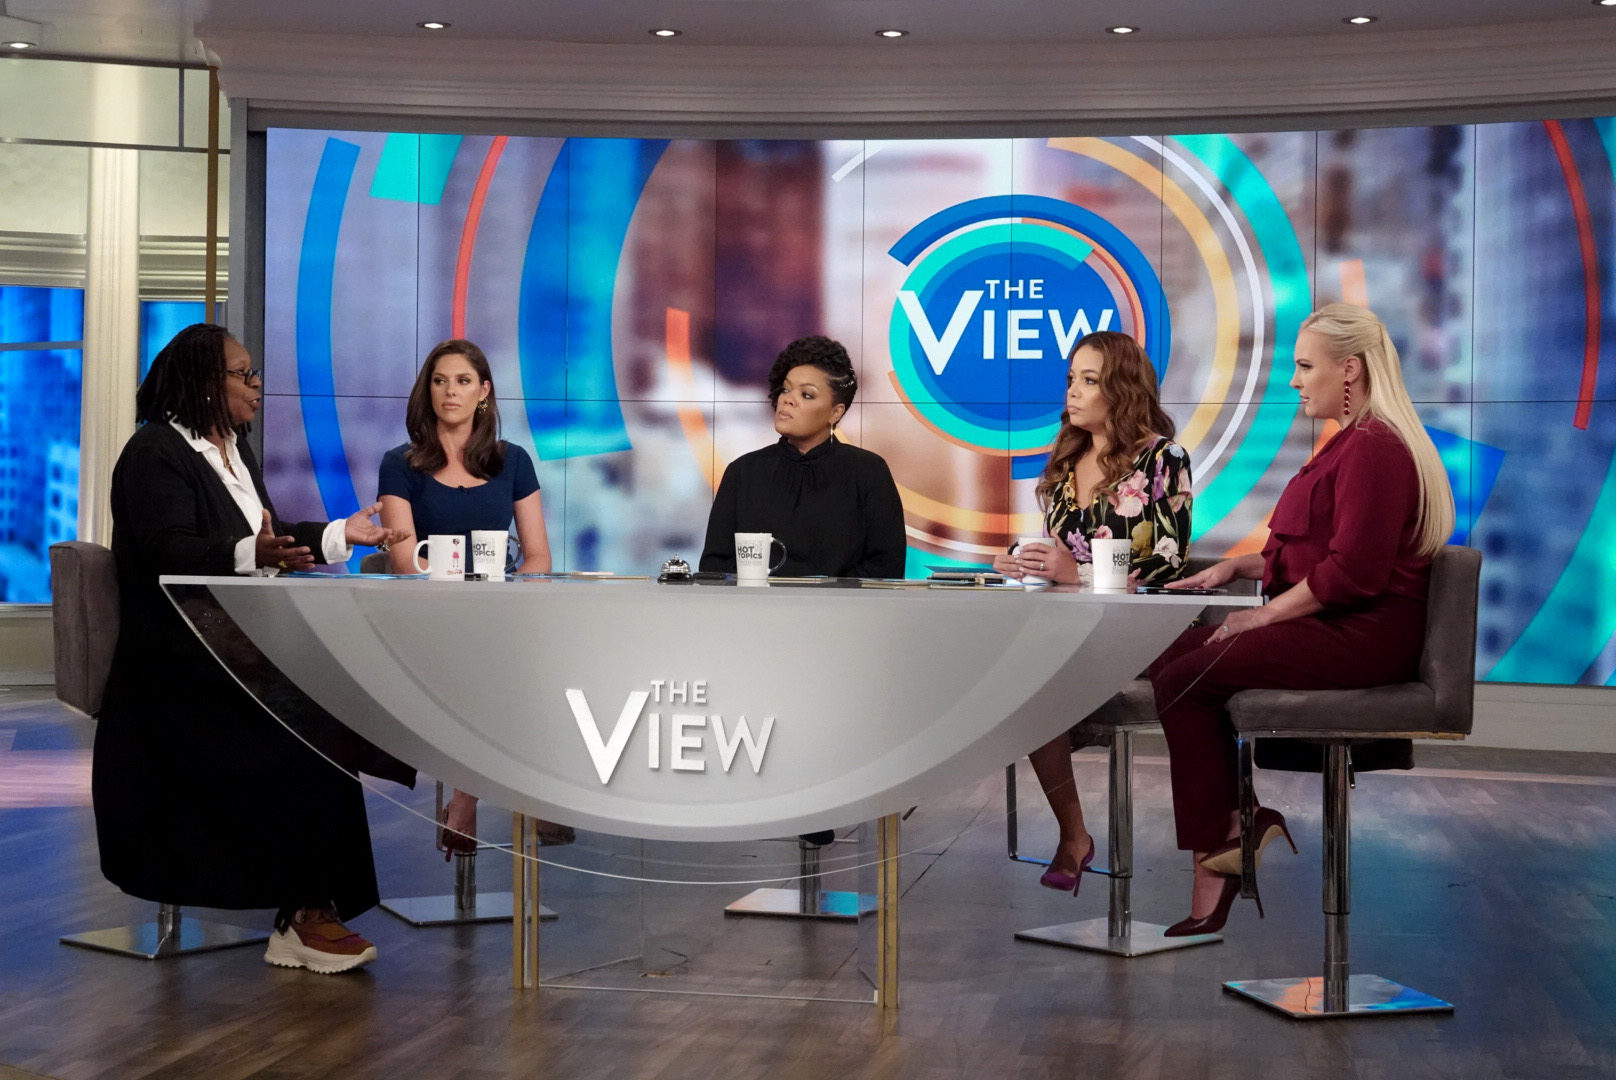 PHOTO: Co-host of "The View" discuss the recent Kavanaugh confirmation, Oct. 9, 2018, in New York City.